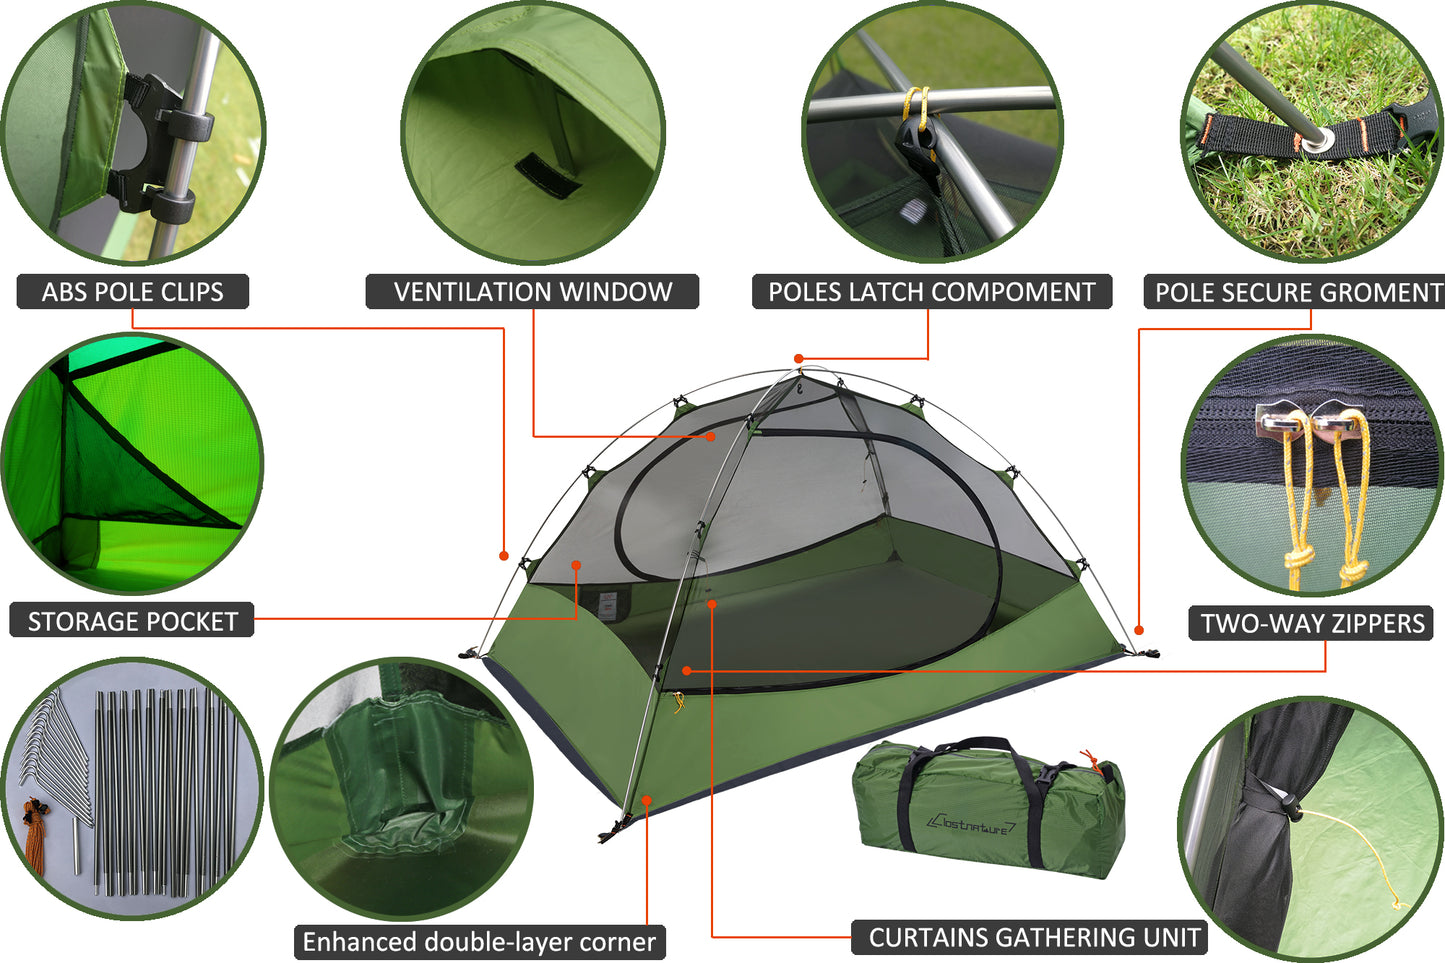 Clostnature 4-Man Lightweight Backpacking Tent - 3 Season Ultralight Waterproof Camping Tent, Large Size Easy Setup Tent for Family, Outdoor, Hiking and Mountaineering